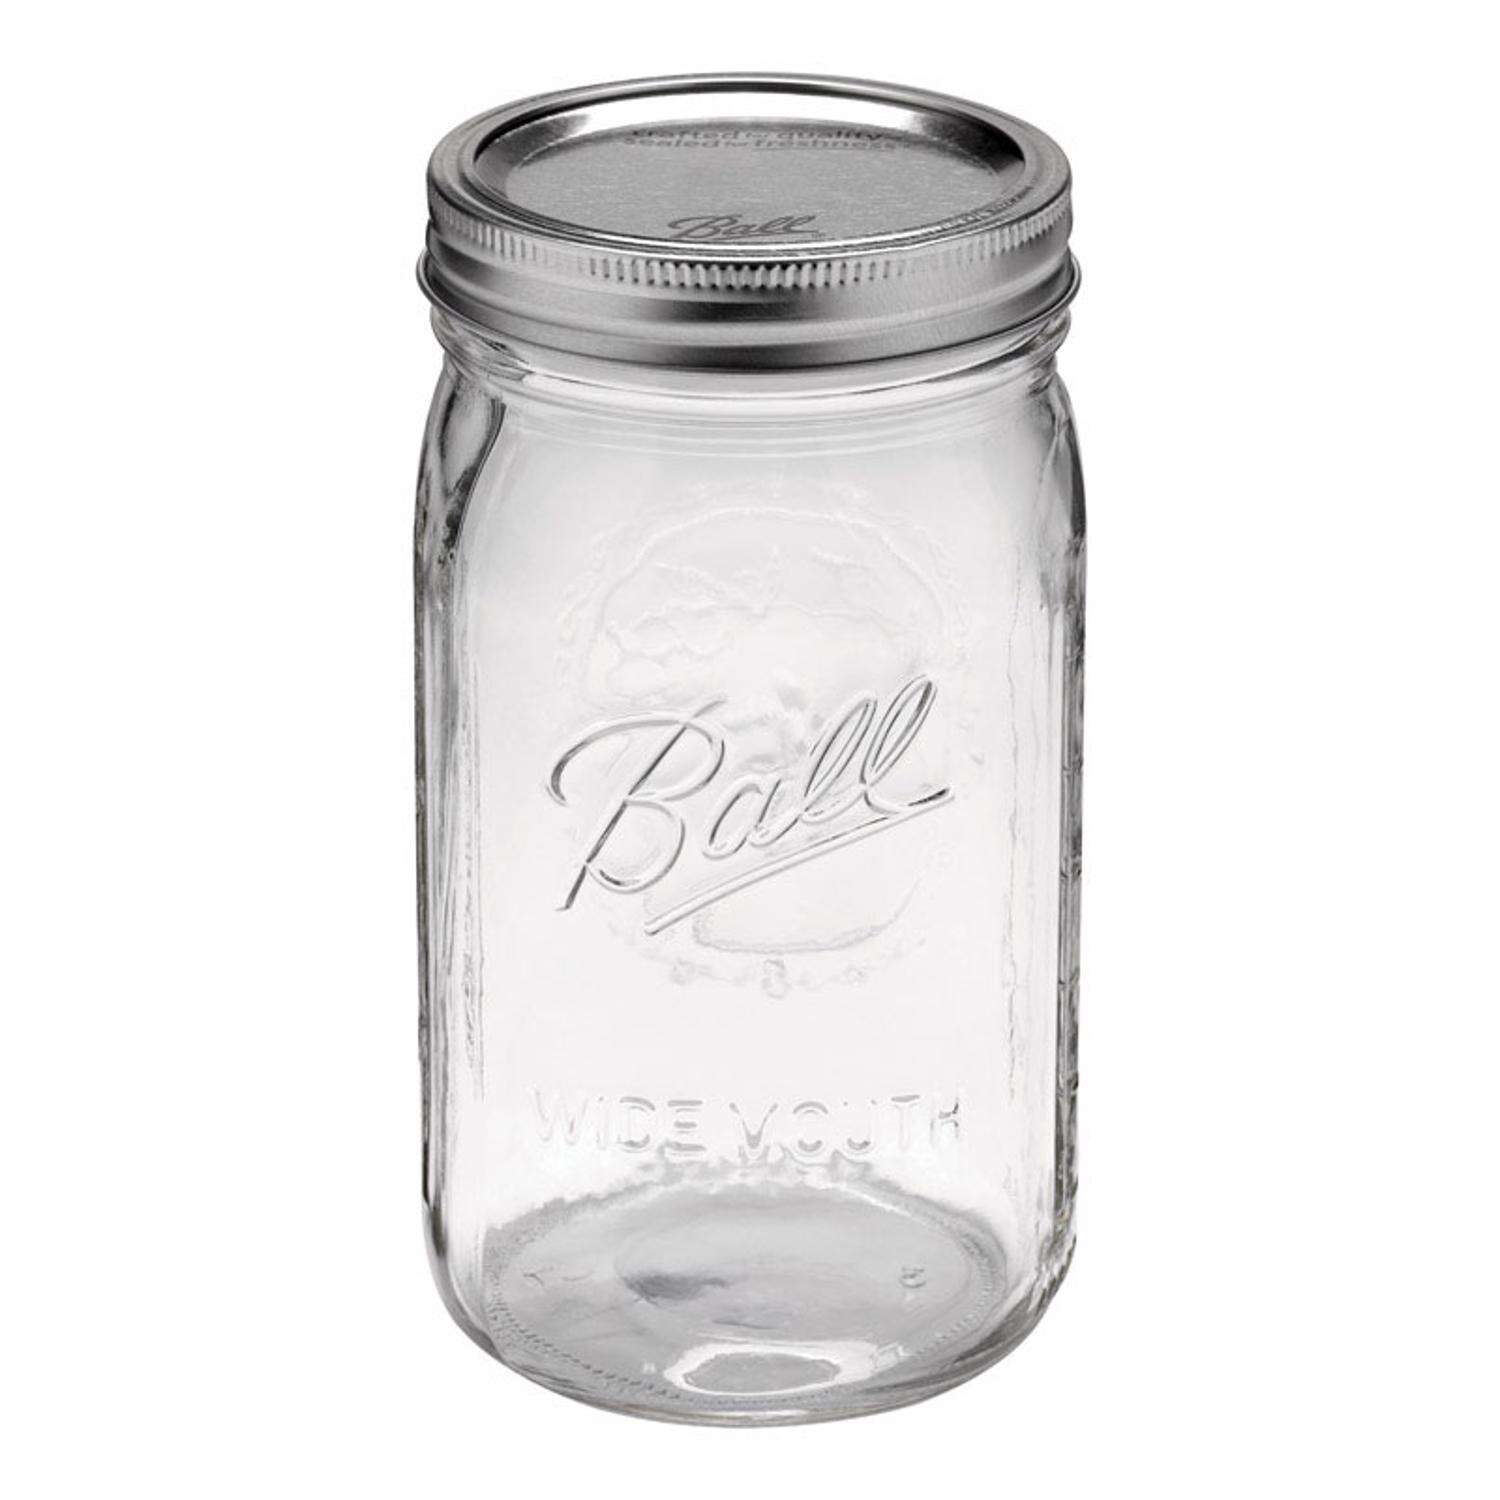 Ball Mason 32 oz Wide Mouth Jars with Lids and Bands Limited Edition Set of 12 Jars. 